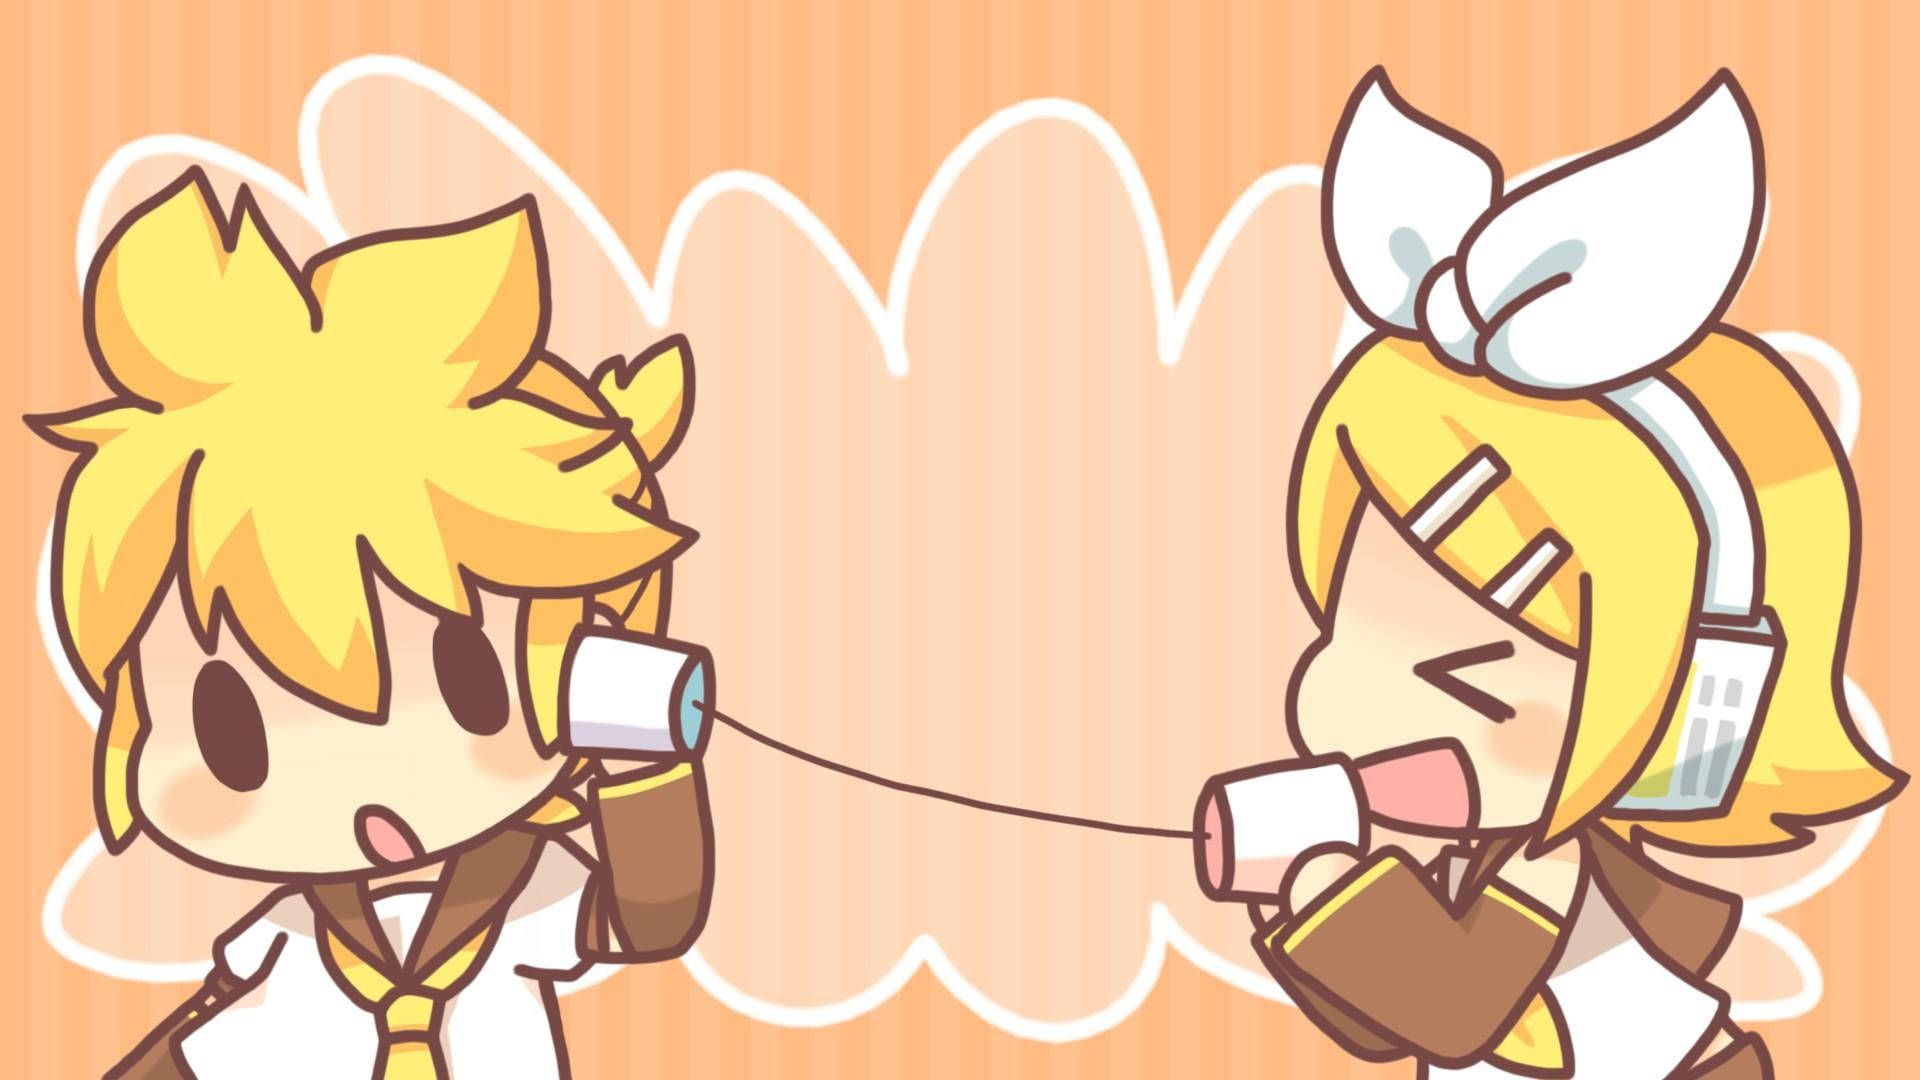 Kagamine Len and Rin are using a paper phone to talk to each other. - 